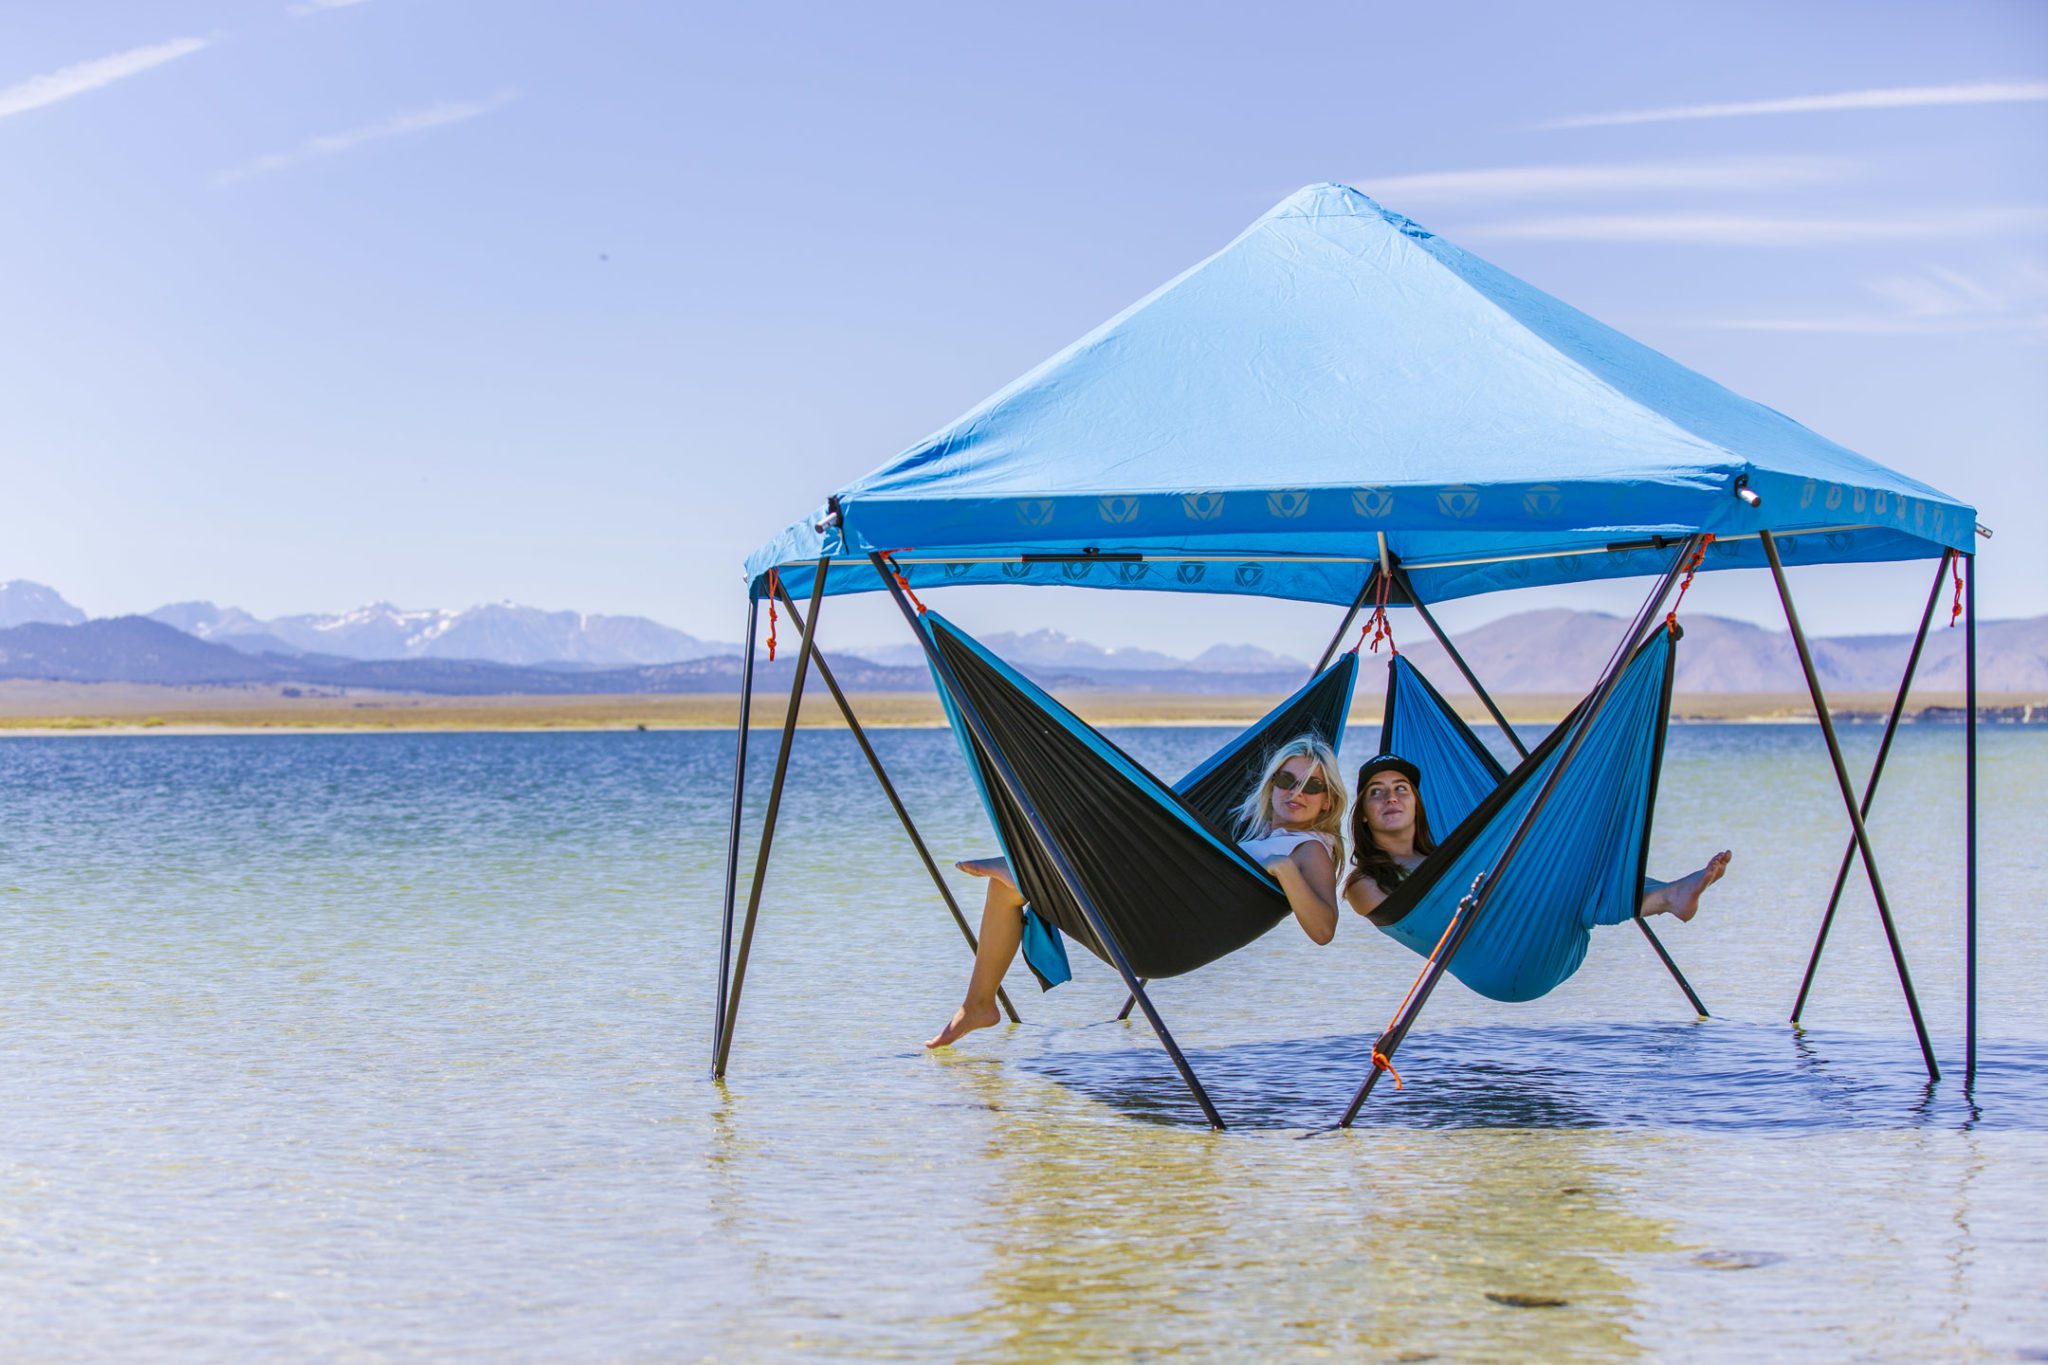 iDome hammock tent and dome tent setup featuring a couple enjoying a relaxing nap on the beach.